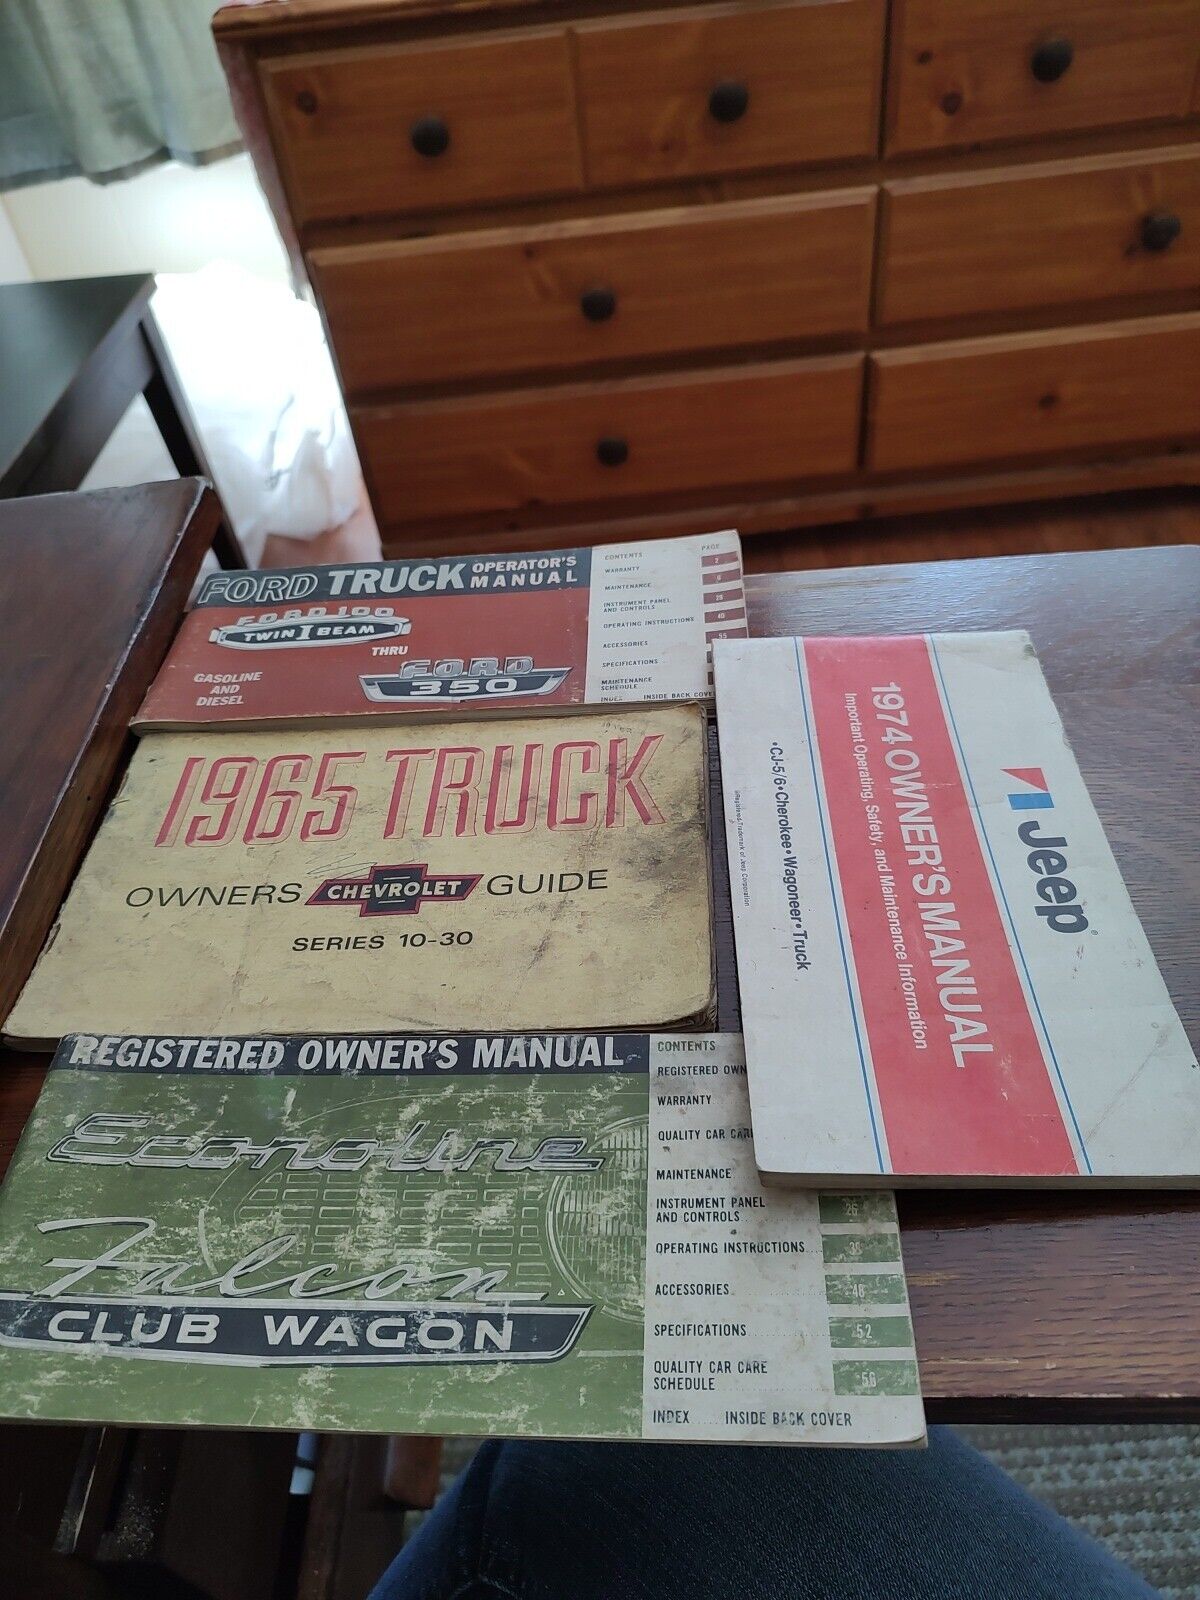 VINTAGE 1965 FORD TRUCK MANUAL ,Econoline Wagon,1974 Jeep, 1965 Chevy Lot 4